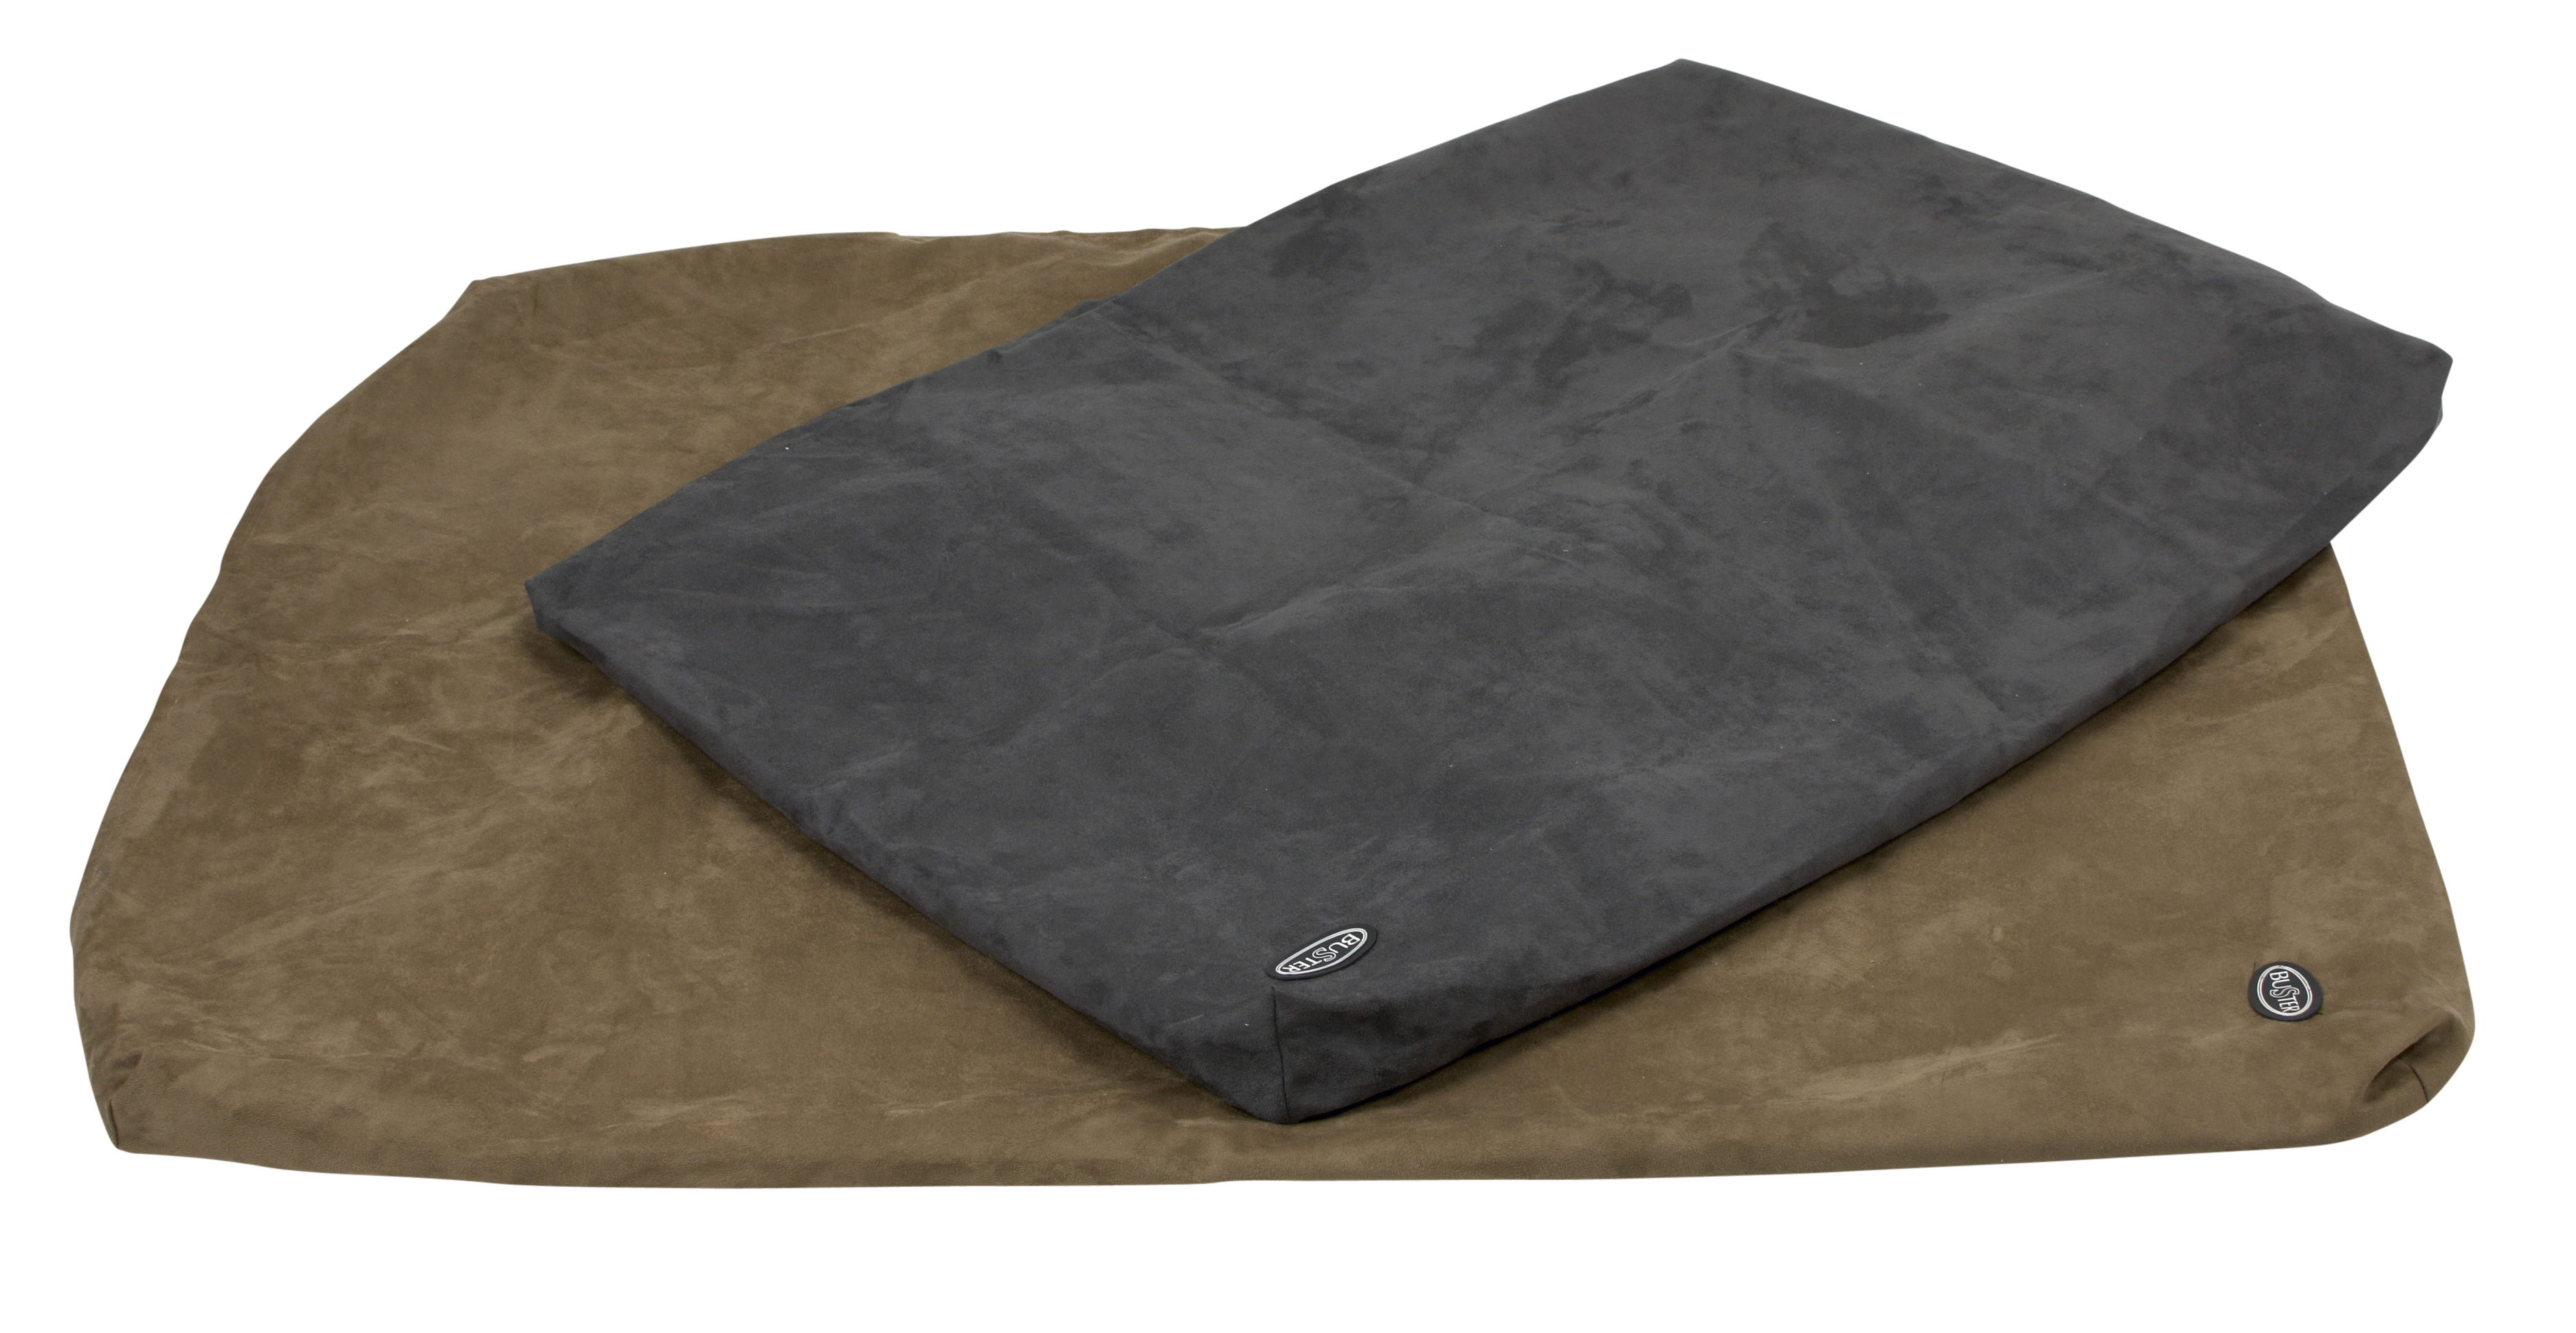 Kruuse Buster Memory Foam Dog Bed Cover